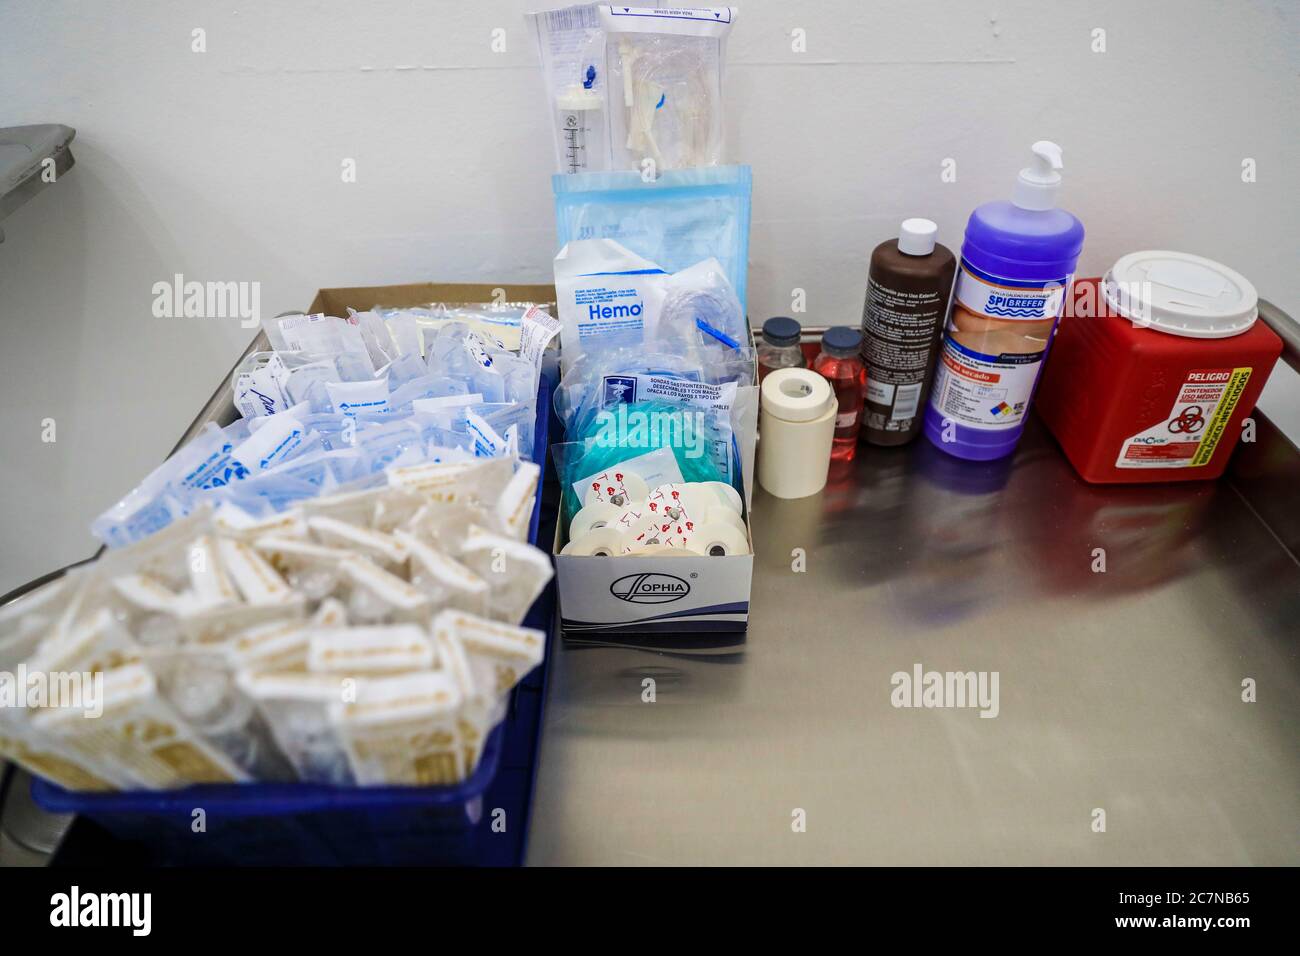 HERMOSILLO, MEXICO - JULY17: Healing material, medical supplies, alcohol, melteolate geringa, injections, sanitizer, disinfectant, bandages, gauze, medical tape, sodium chloride, saline solution, Hartmann's Solution, during the opening ceremony of the unit intensive therapy operation to care for patients with covid-19 in the 4th Zone and Military Hospital on July 17, 2020 in Hermosillo, Mexico. (Photo by Luis Gutierrez / Norte Photo /)  Material de curacion, insumos medicos, alcohol, melteolateo, geringa, inyeciones, sanitizante, desinfectamnte, vendas, gasa, cinta medica, cloruro de sodio, so Stock Photo